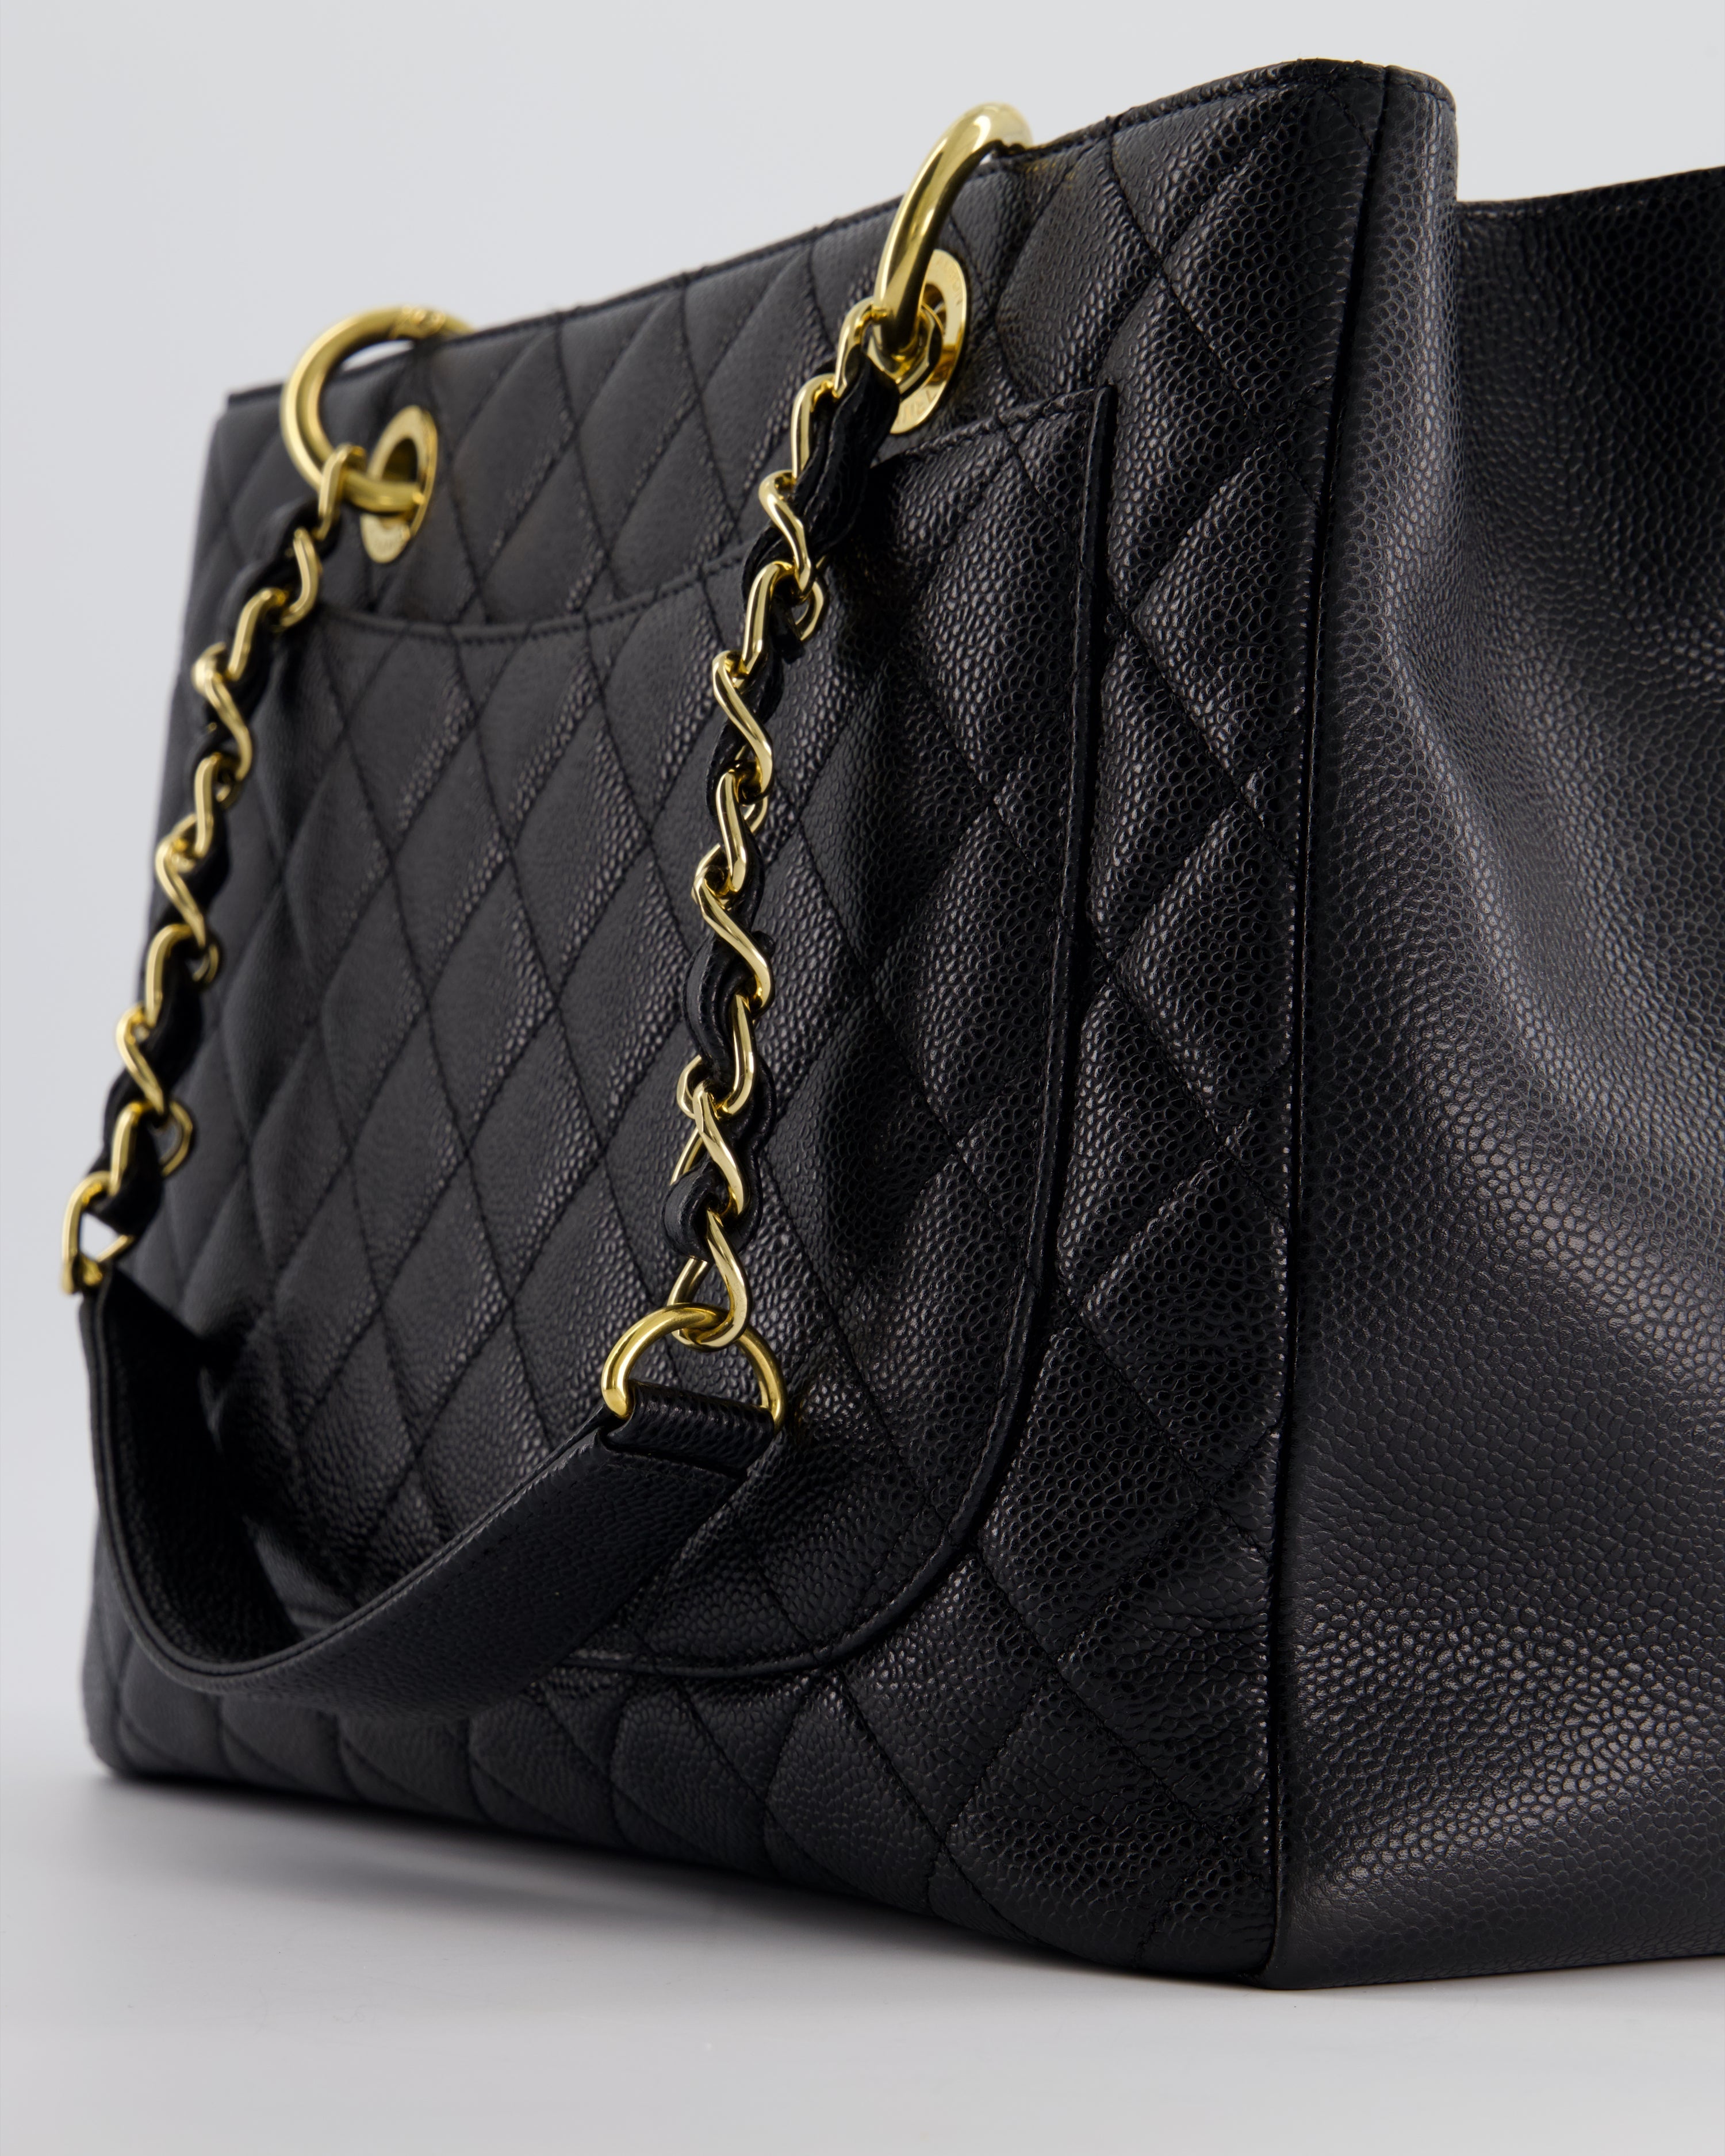 Chanel Black Caviar GST Tote Bag with Gold Hardware